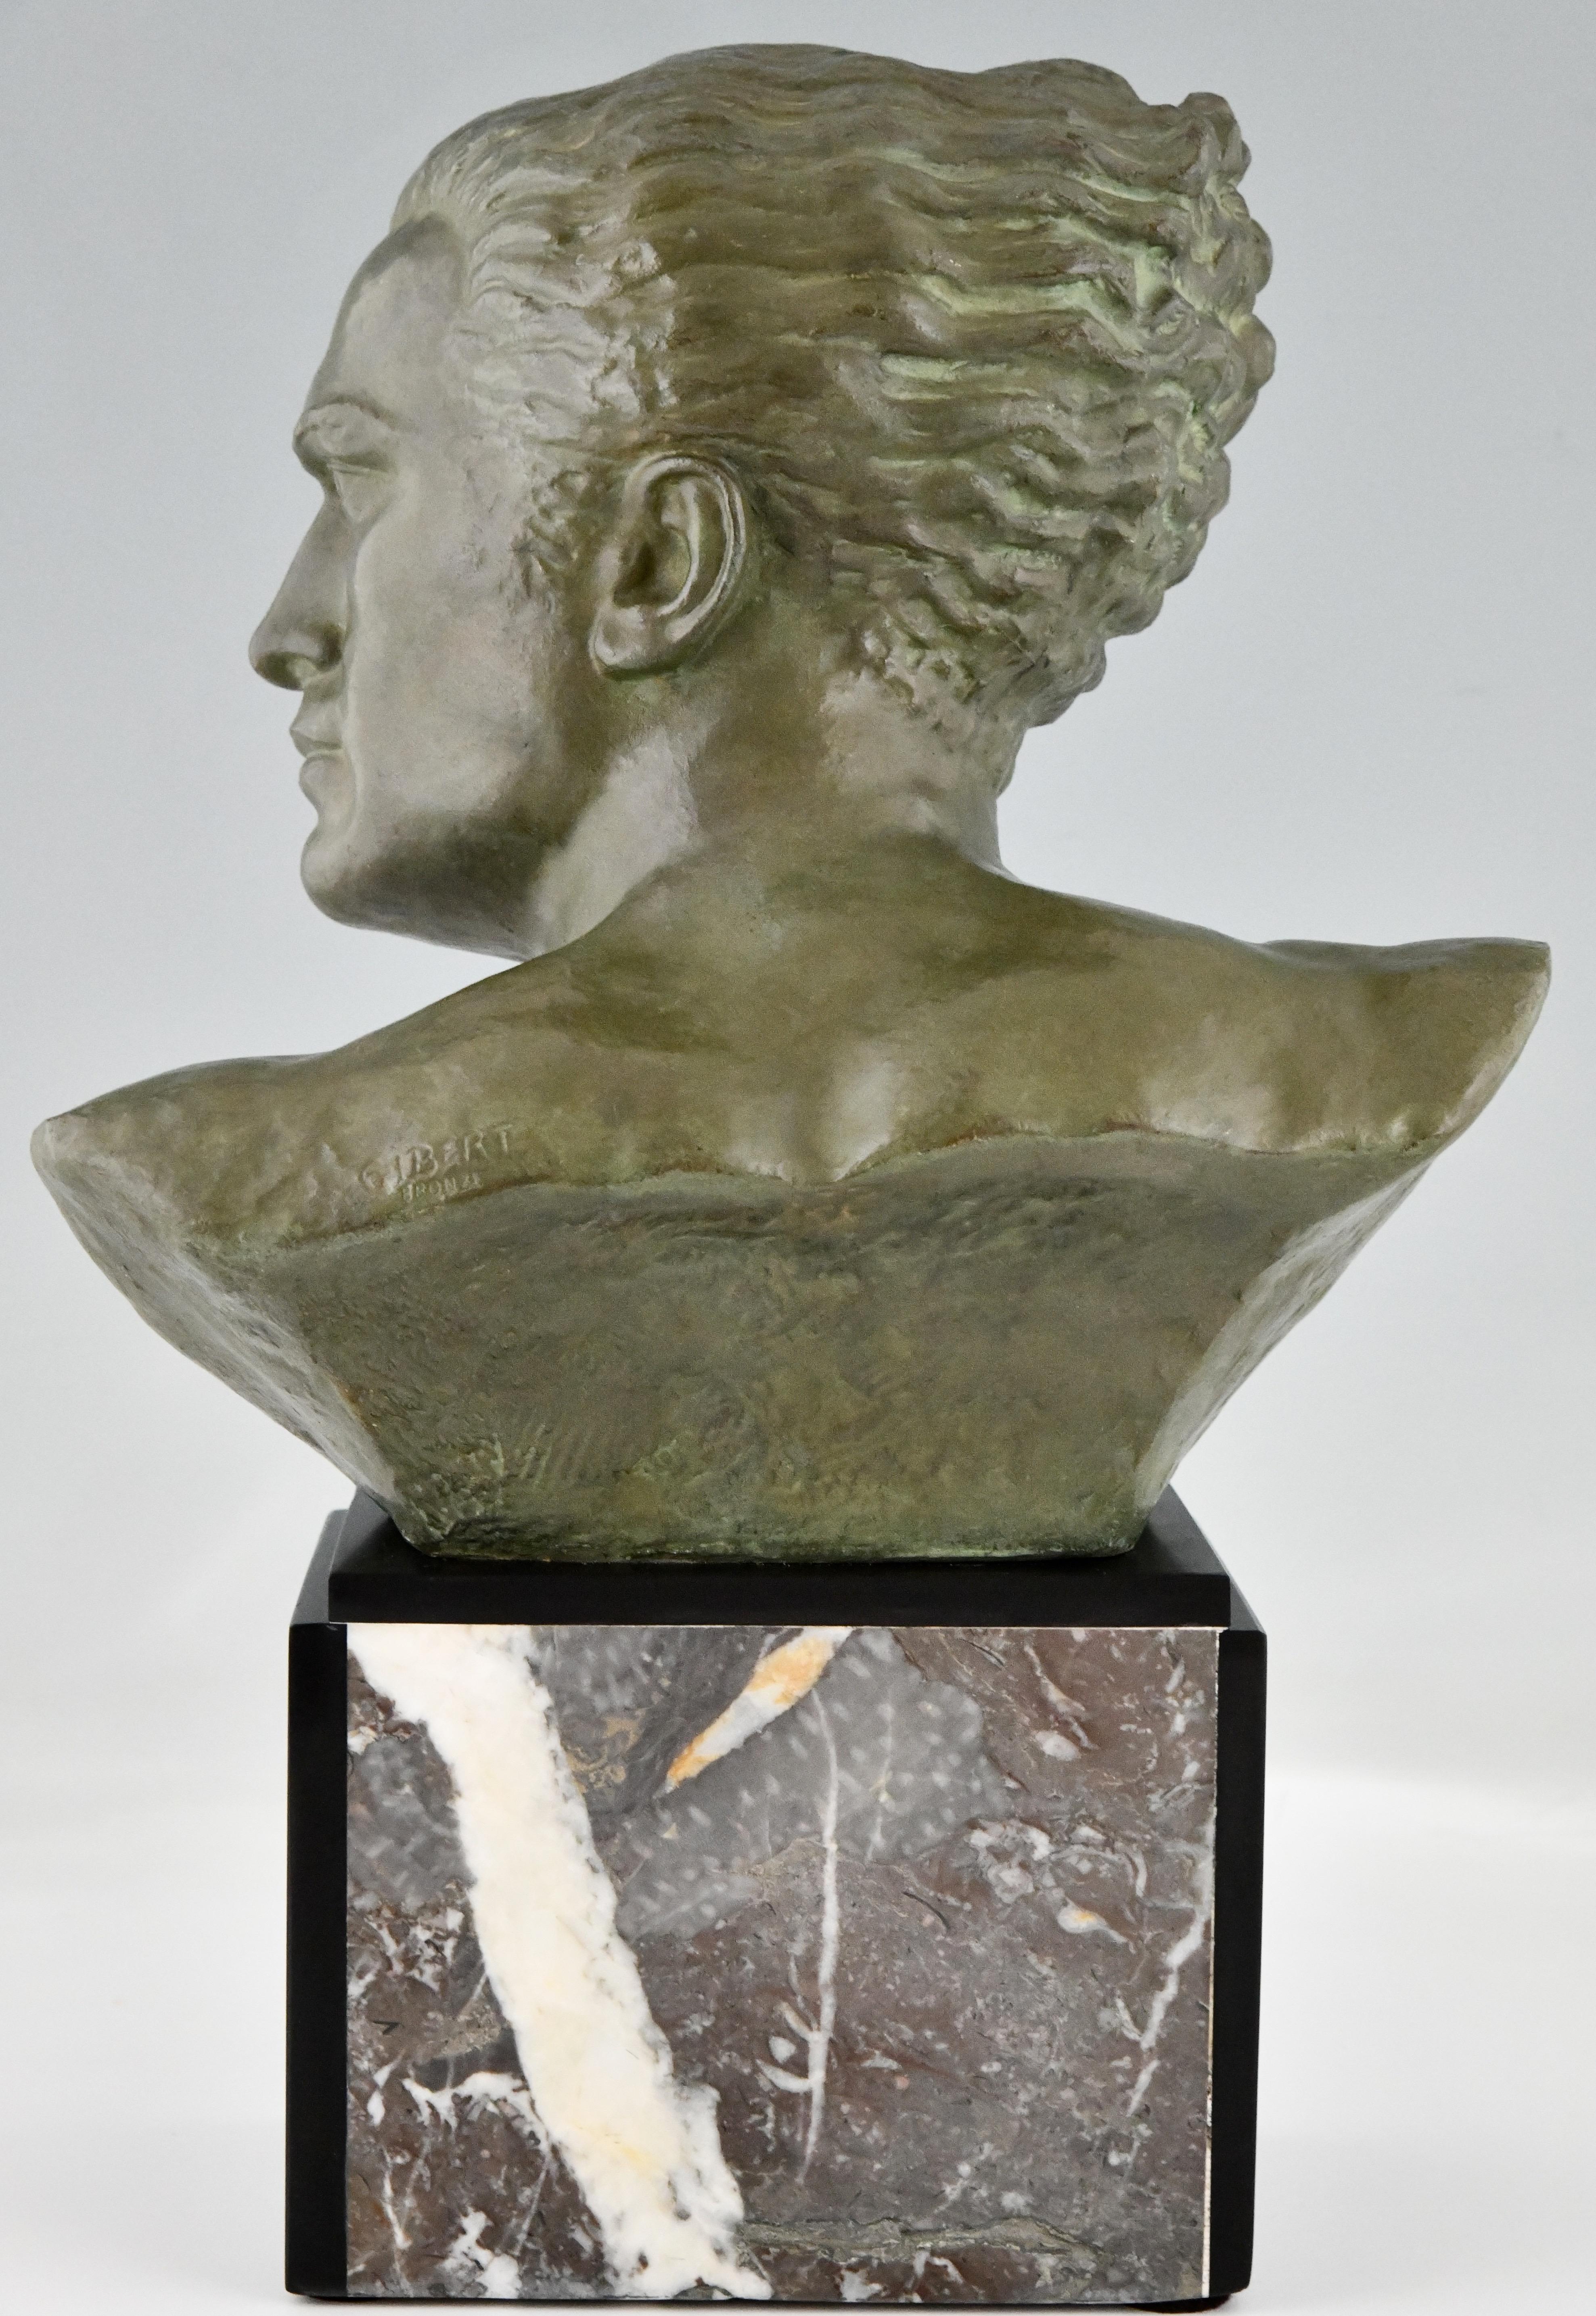 Early 20th Century Art Deco Bronze Sculpture Male Bust Aviator Jean Mermoz by Alfred Gilbert, 1925